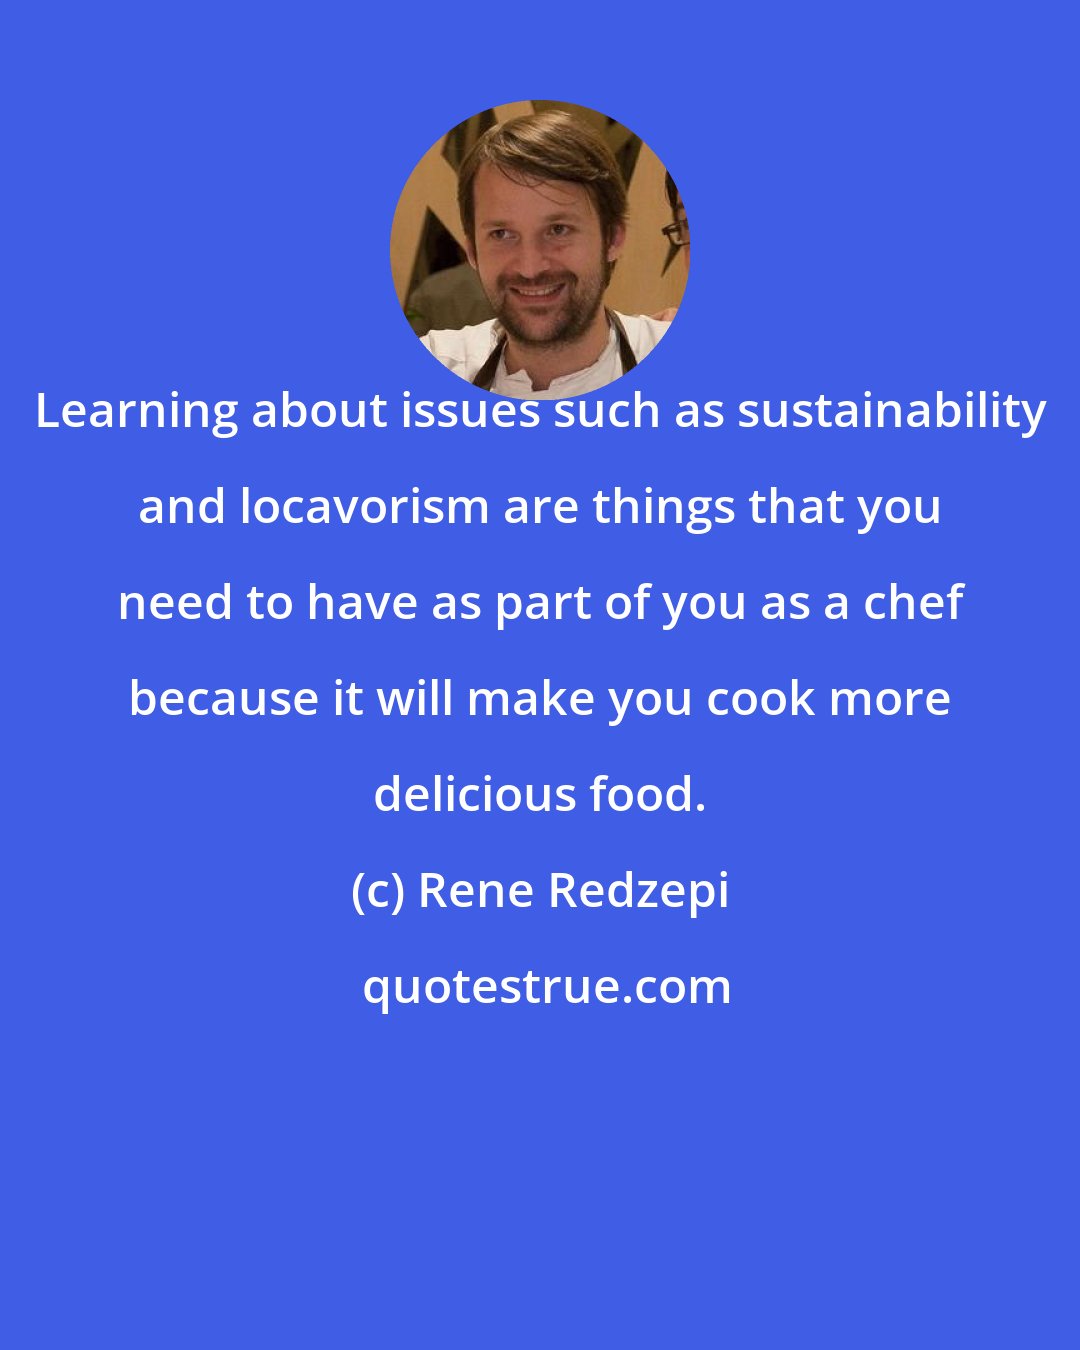 Rene Redzepi: Learning about issues such as sustainability and locavorism are things that you need to have as part of you as a chef because it will make you cook more delicious food.